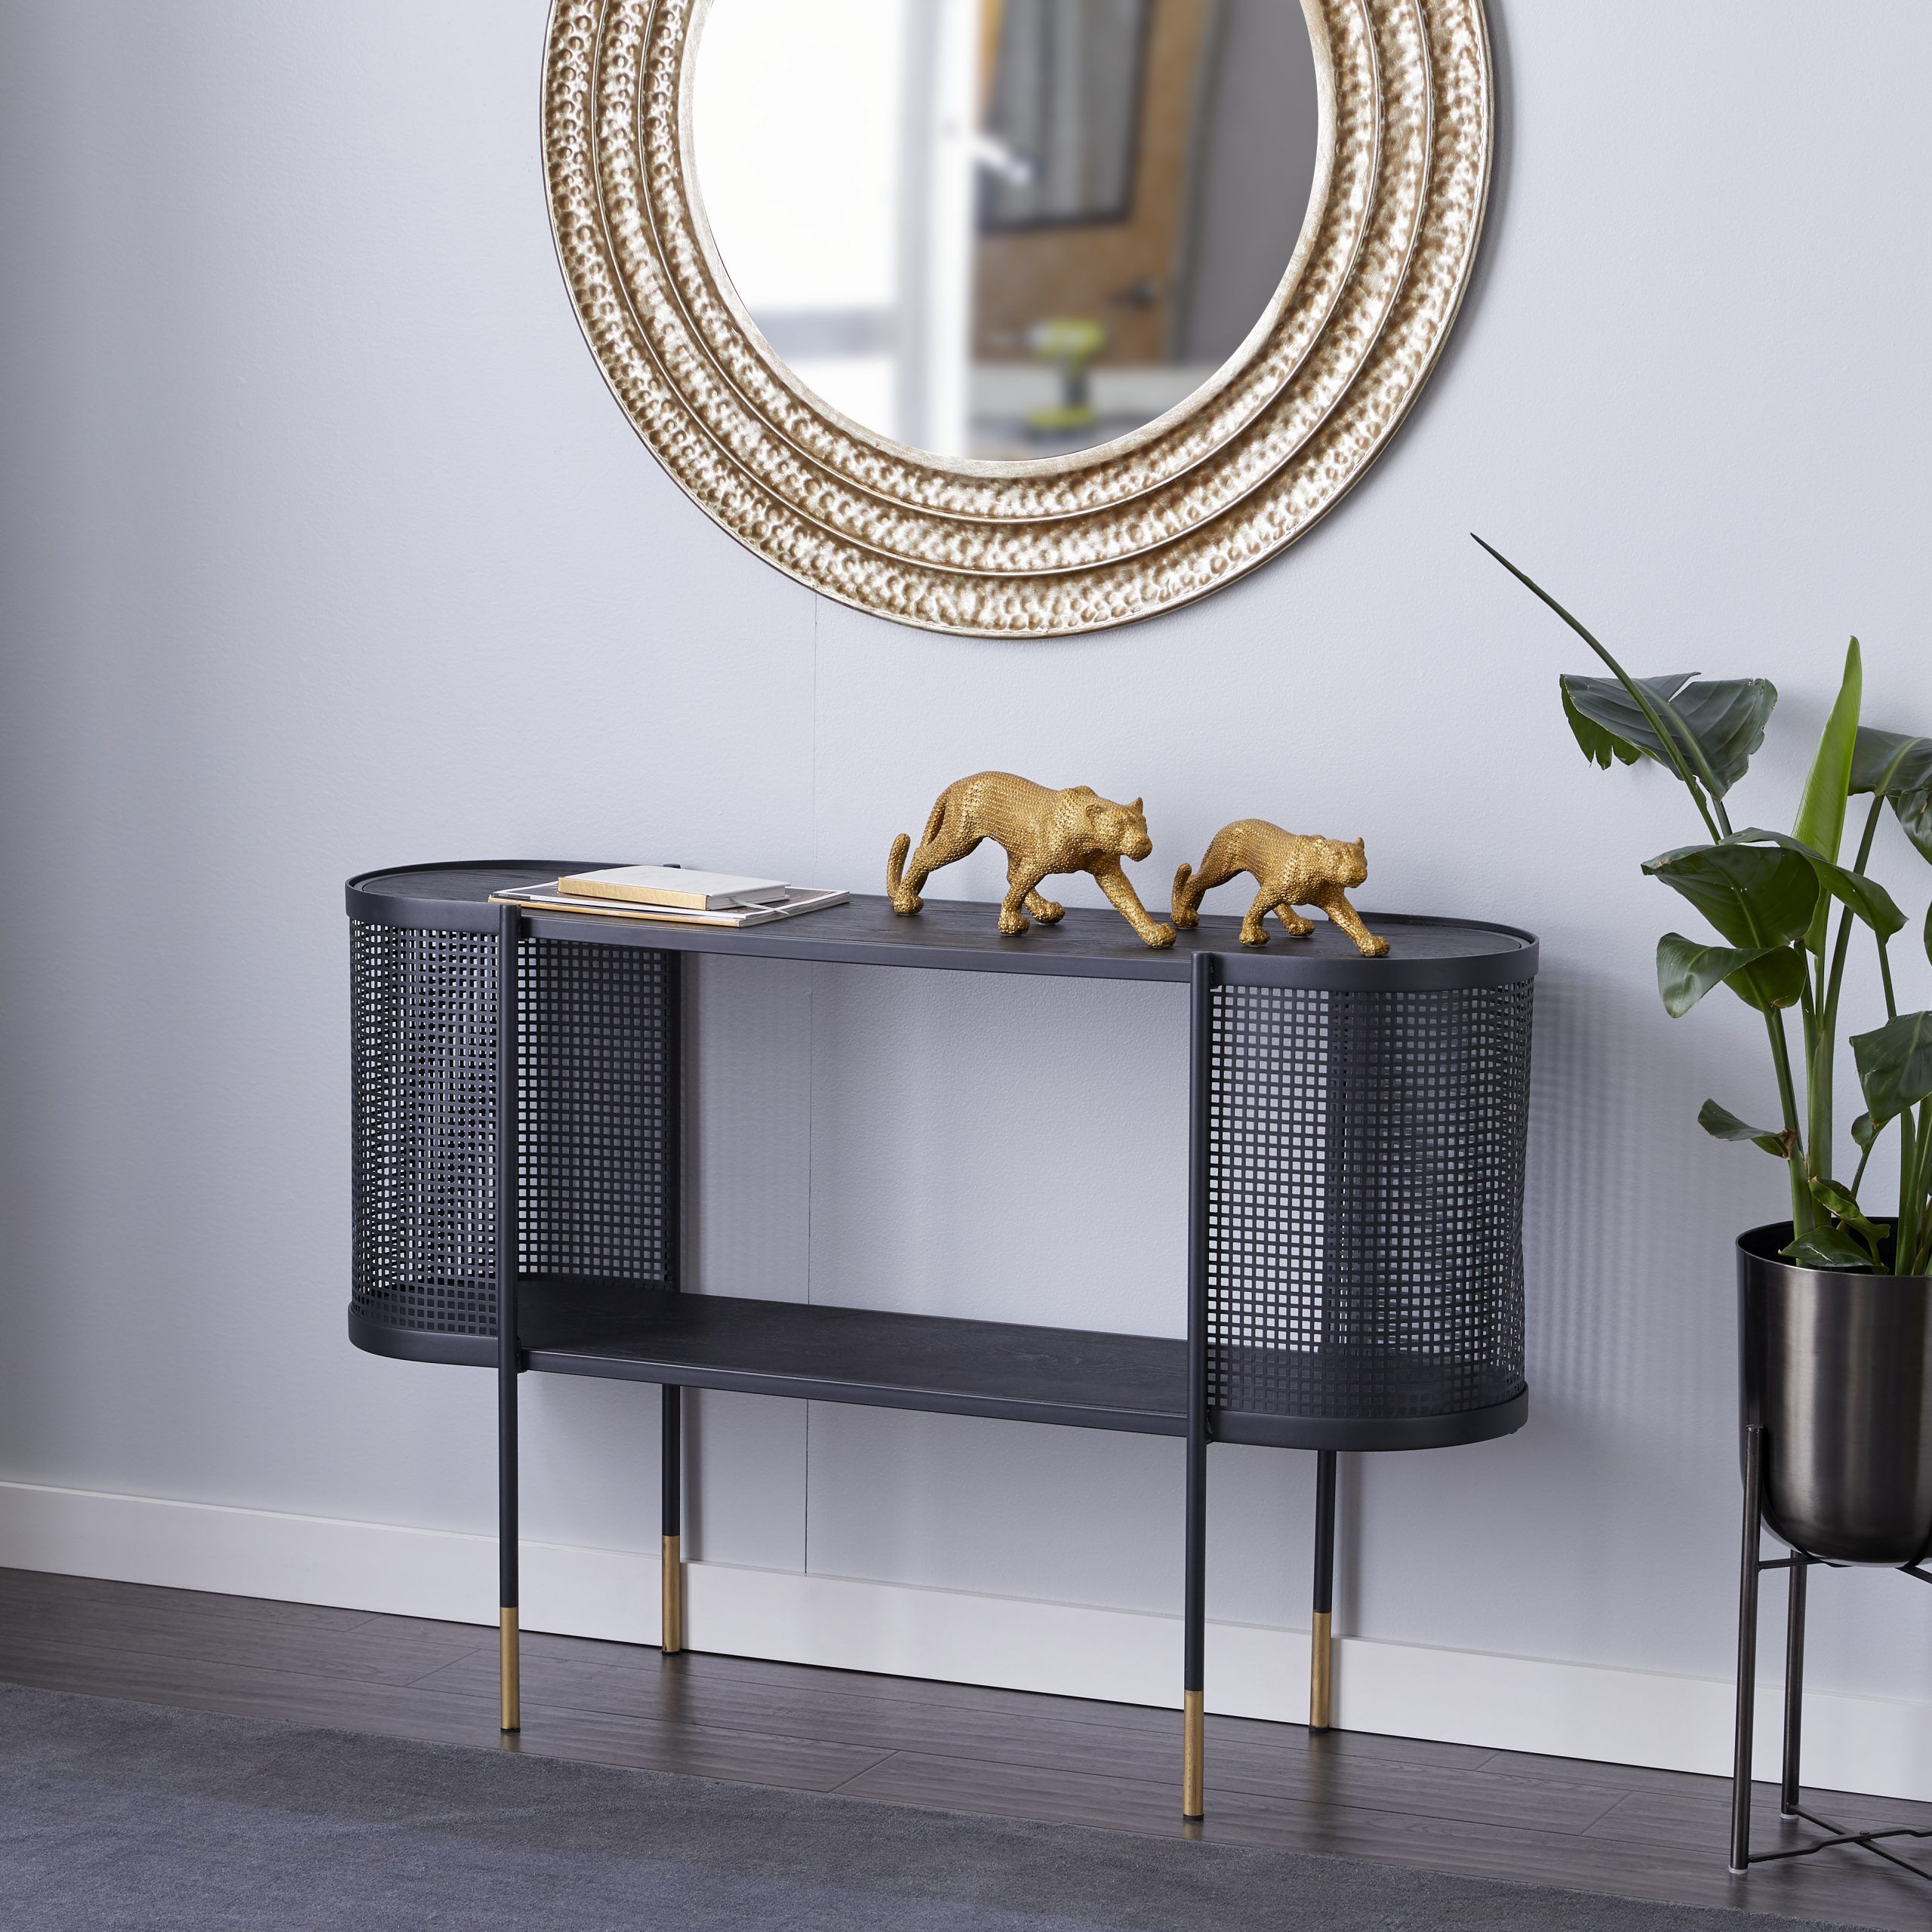 Decmode Oval Black Metal Wrapped Console Table With Open Storage Center For Metallic Gold Modern Console Tables (View 5 of 20)